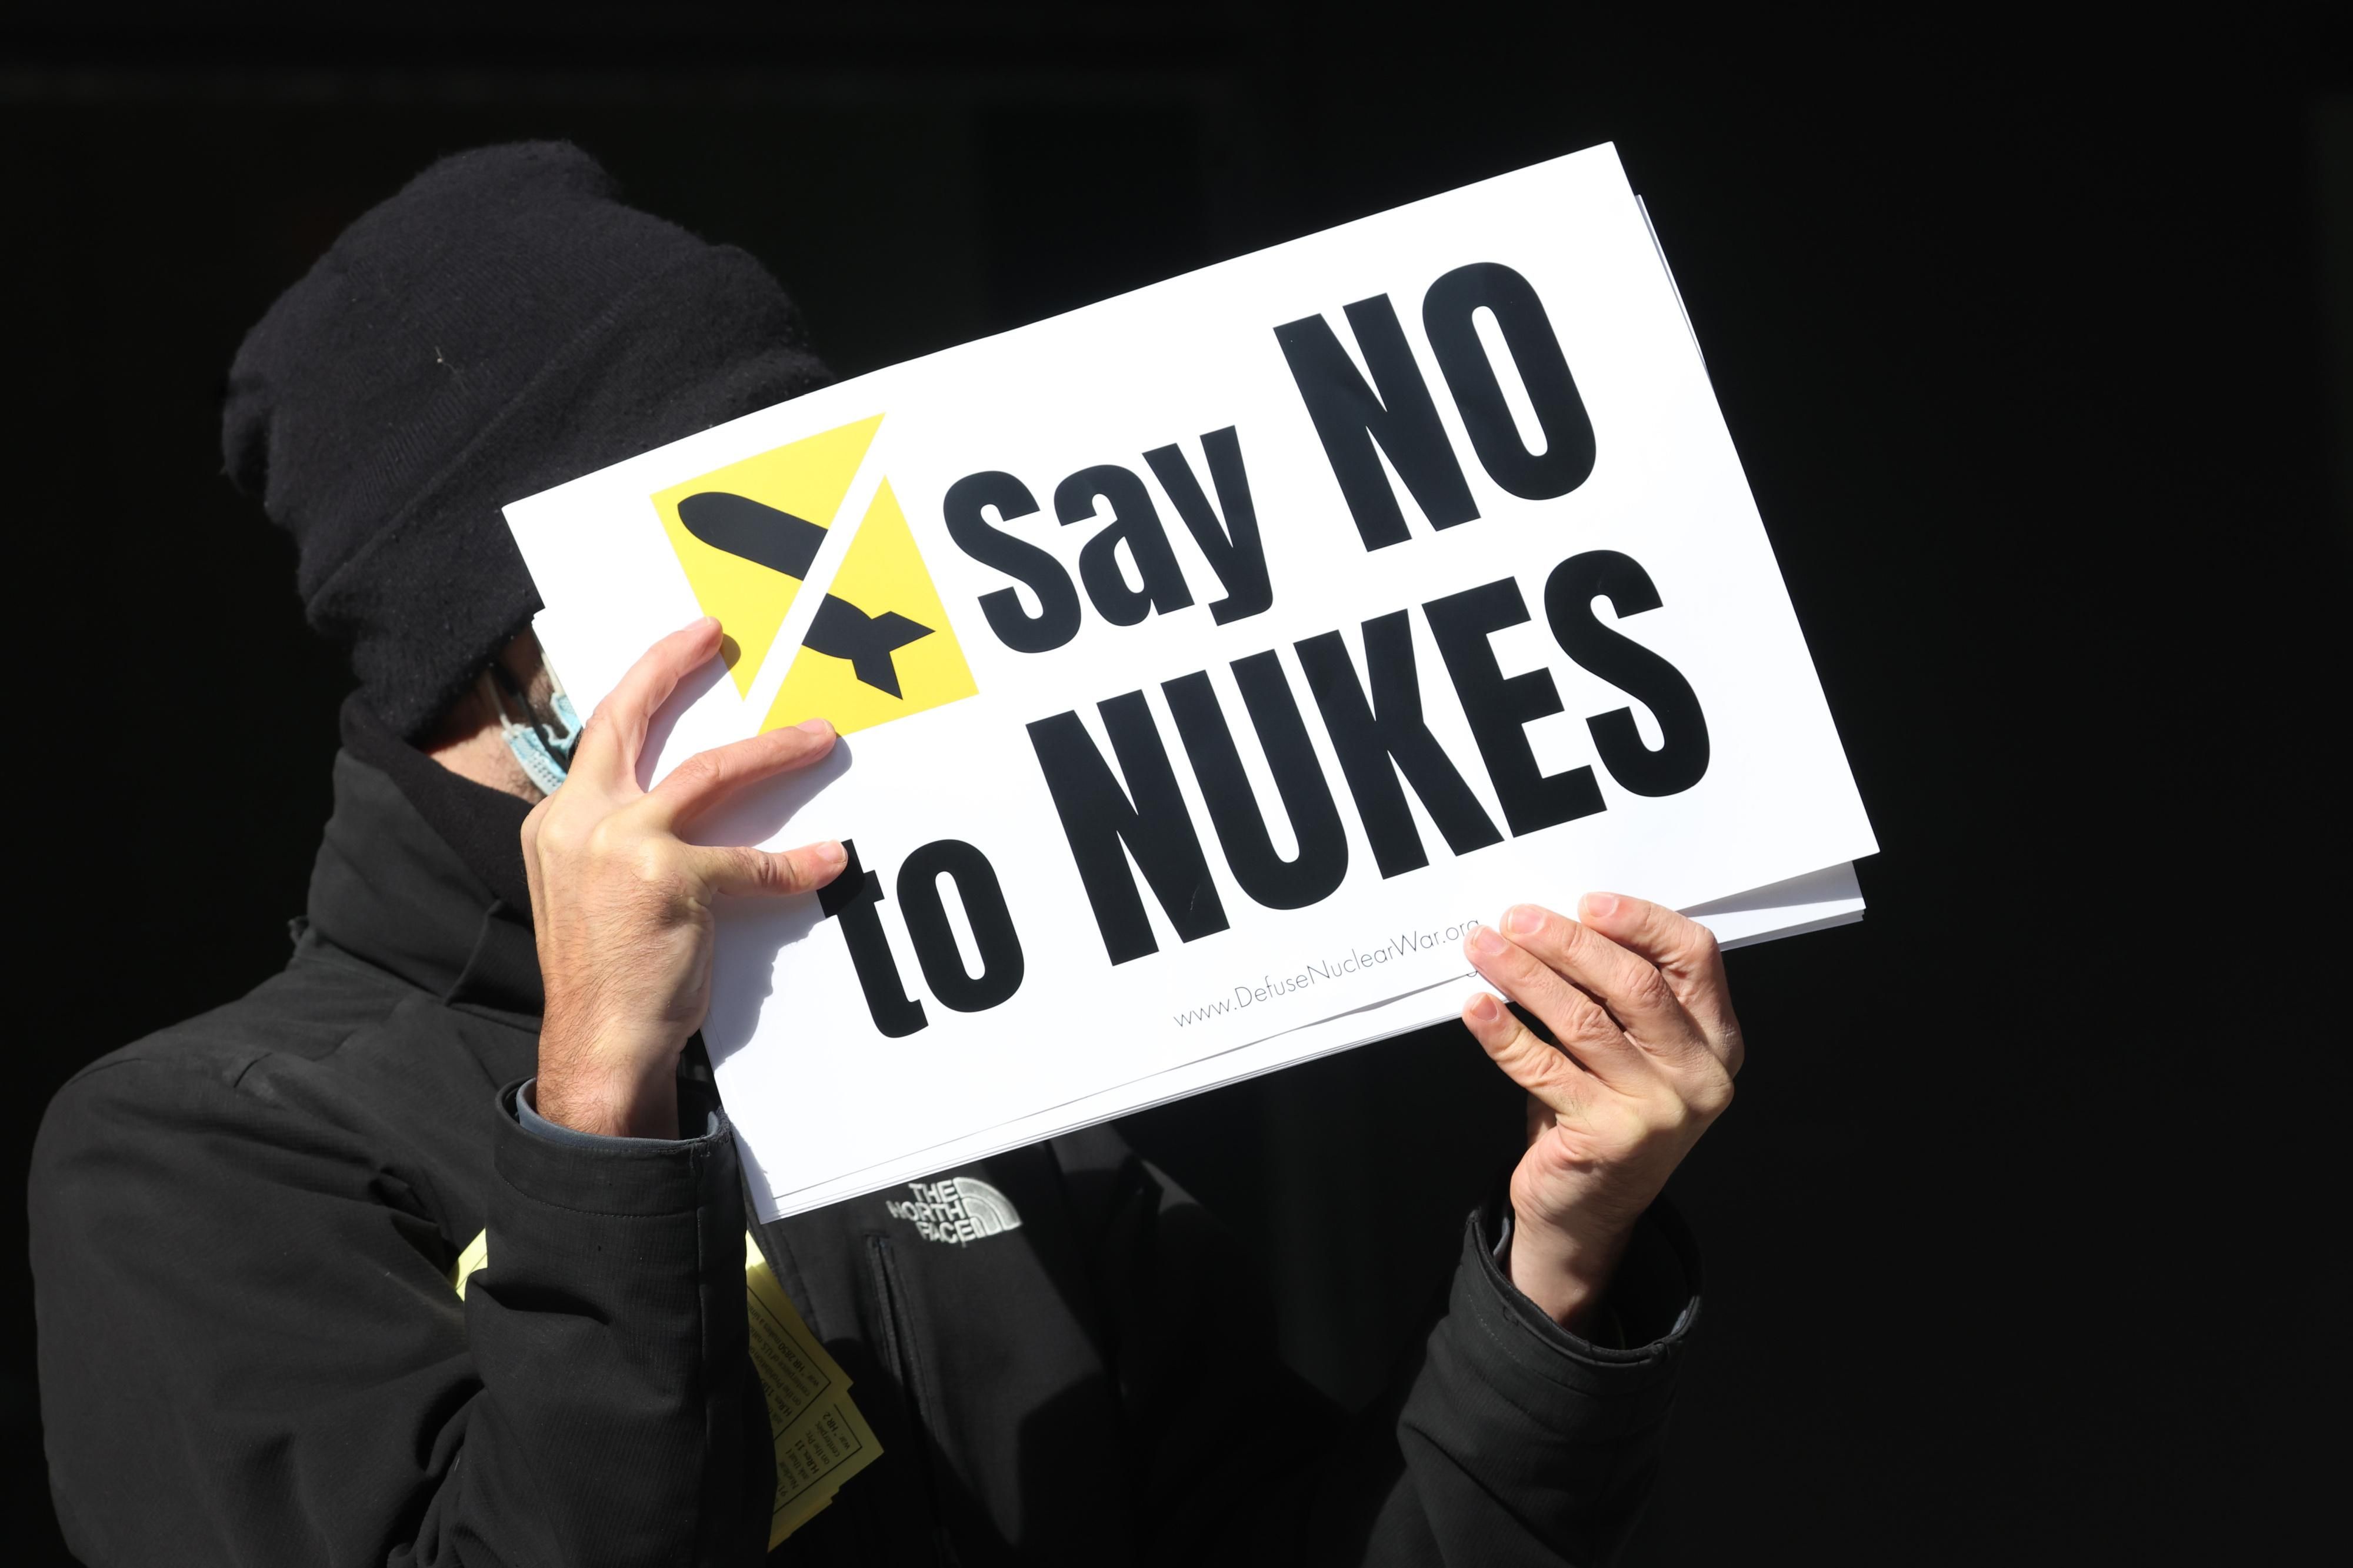 Sign reads "Say NO to Nukes."